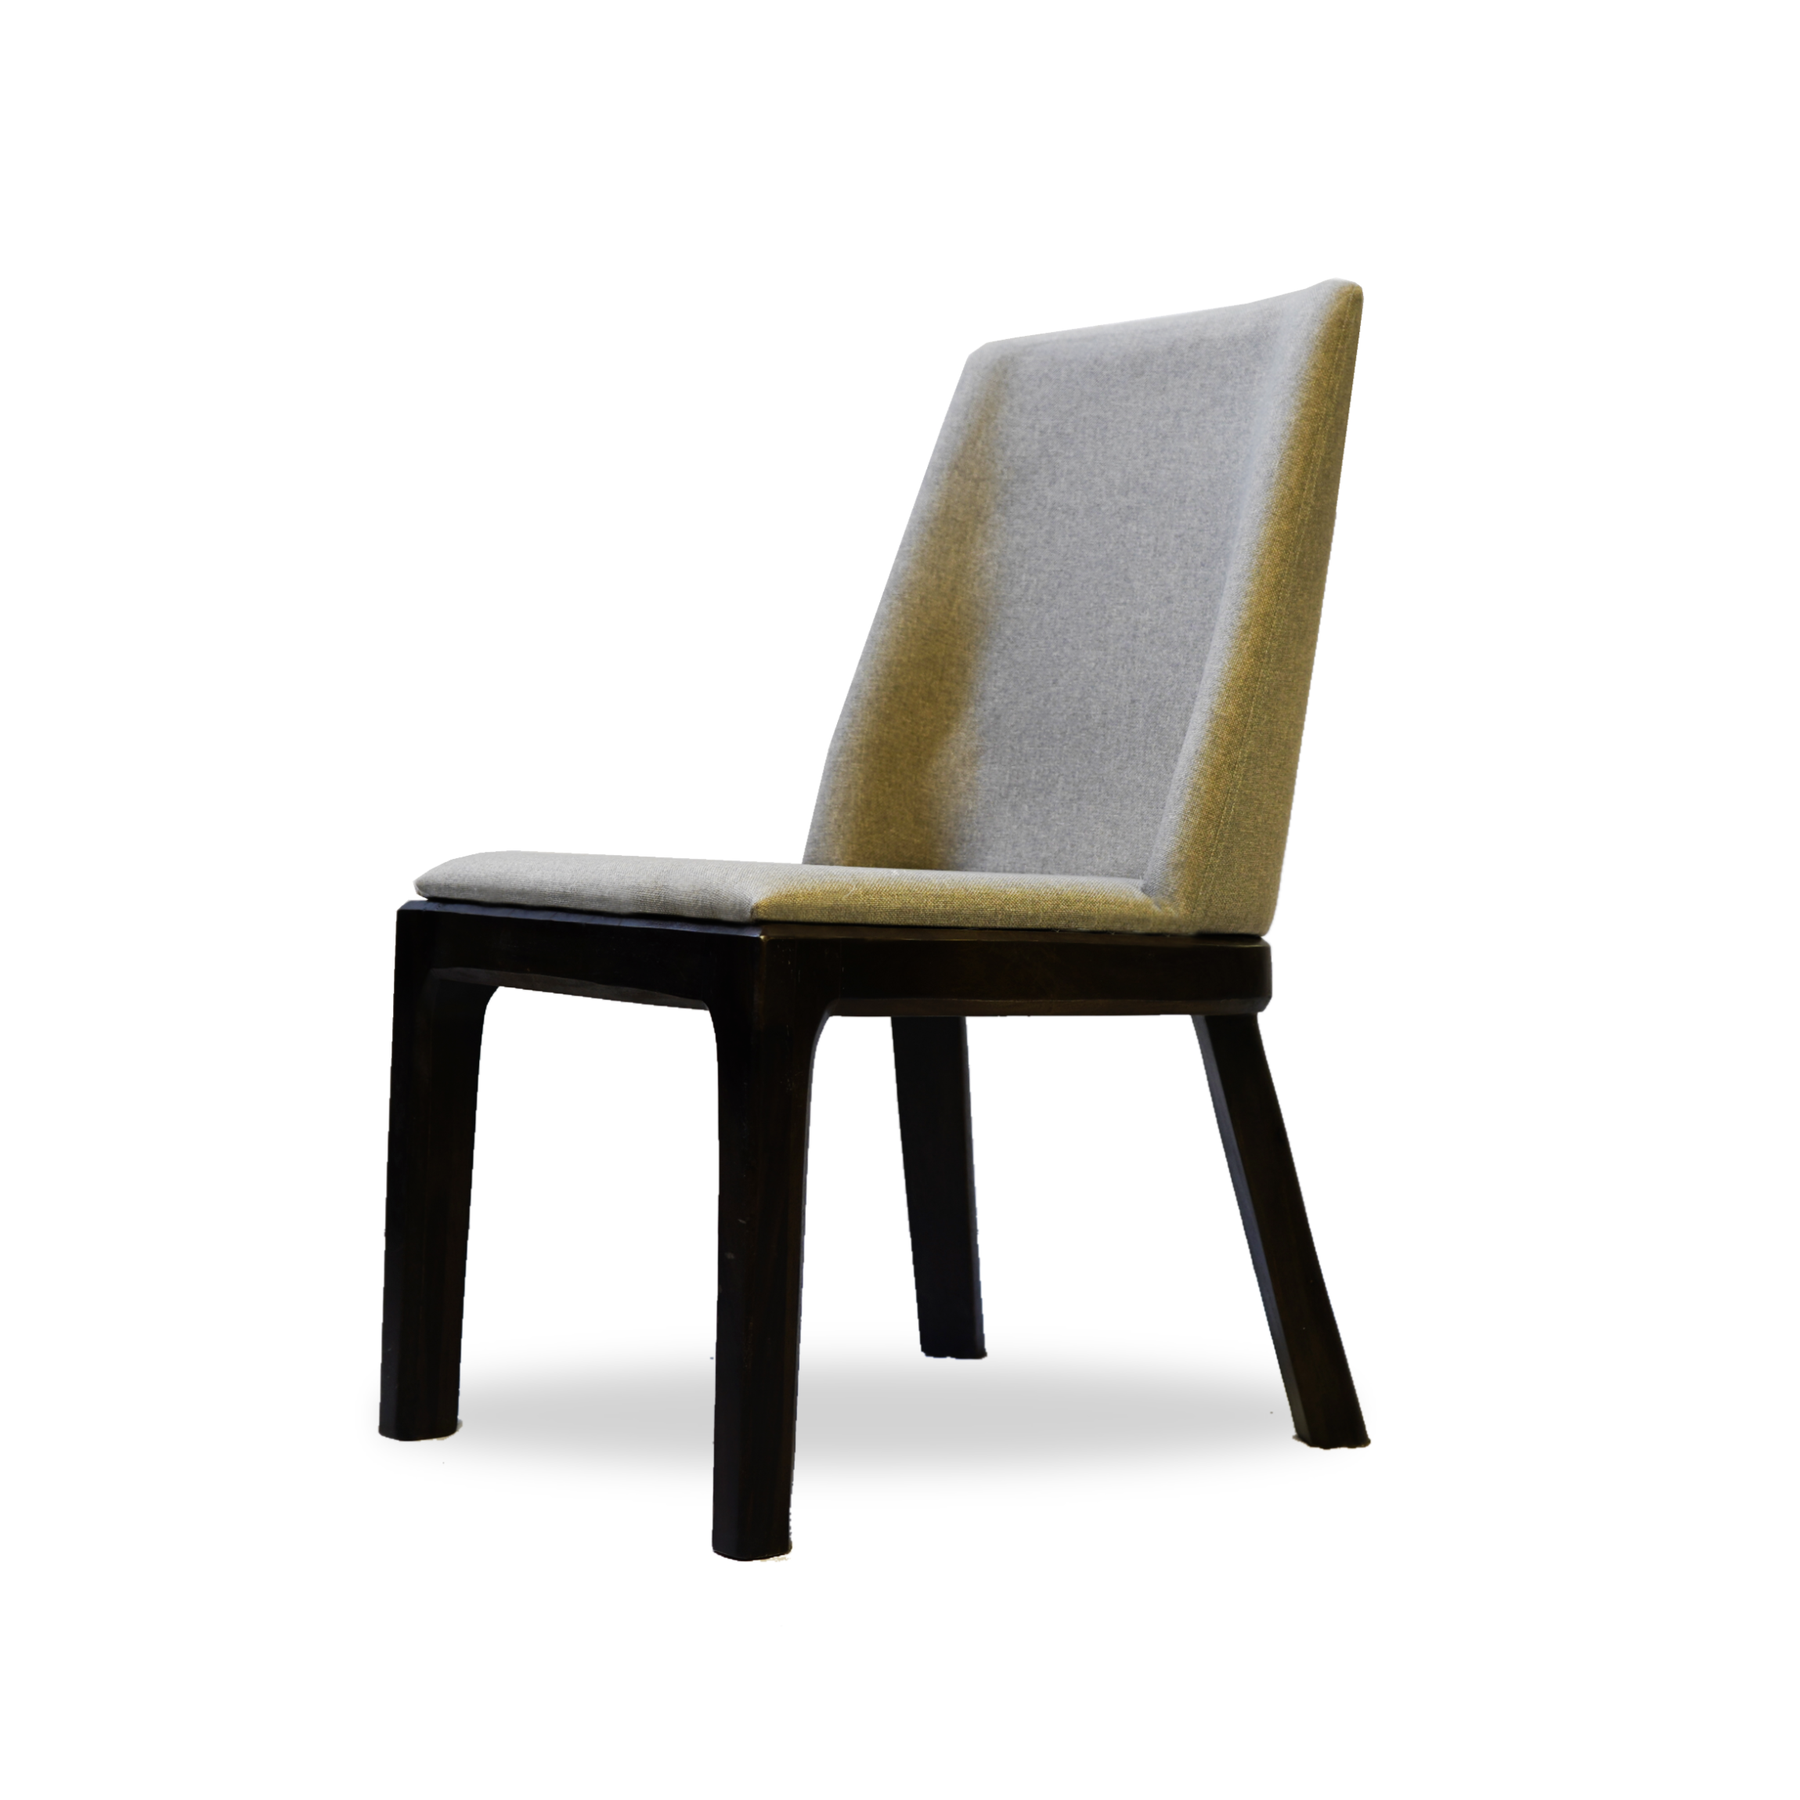 Taarkashi Dining Chair - Mango Wooden Dining Chair with Fabric Seat | 48x59x86 cm